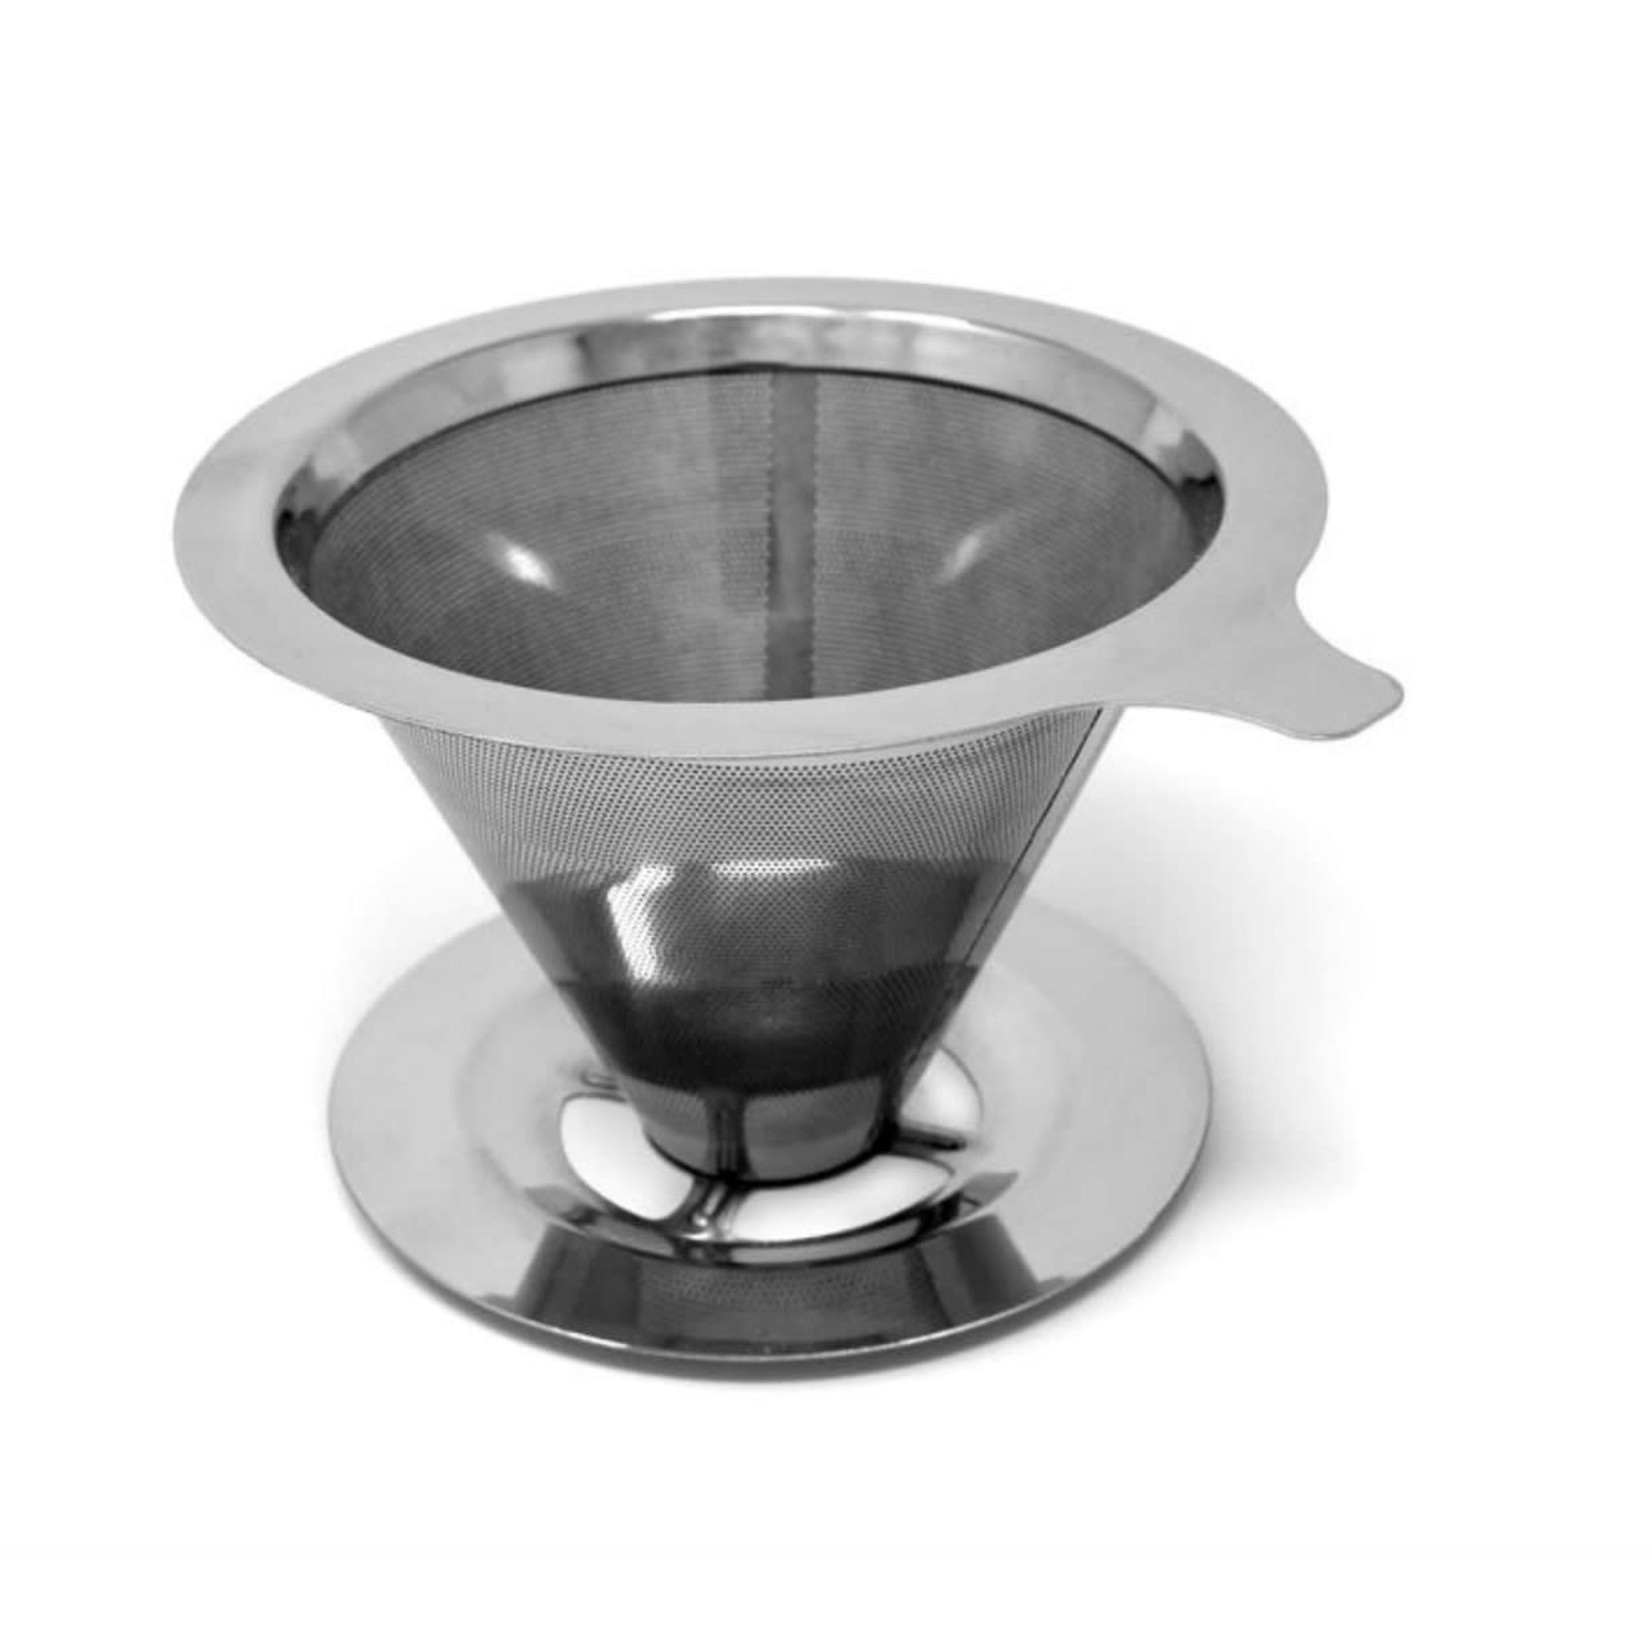 NORPRO NORPRO Coffee Filter w/Stand - Stainless